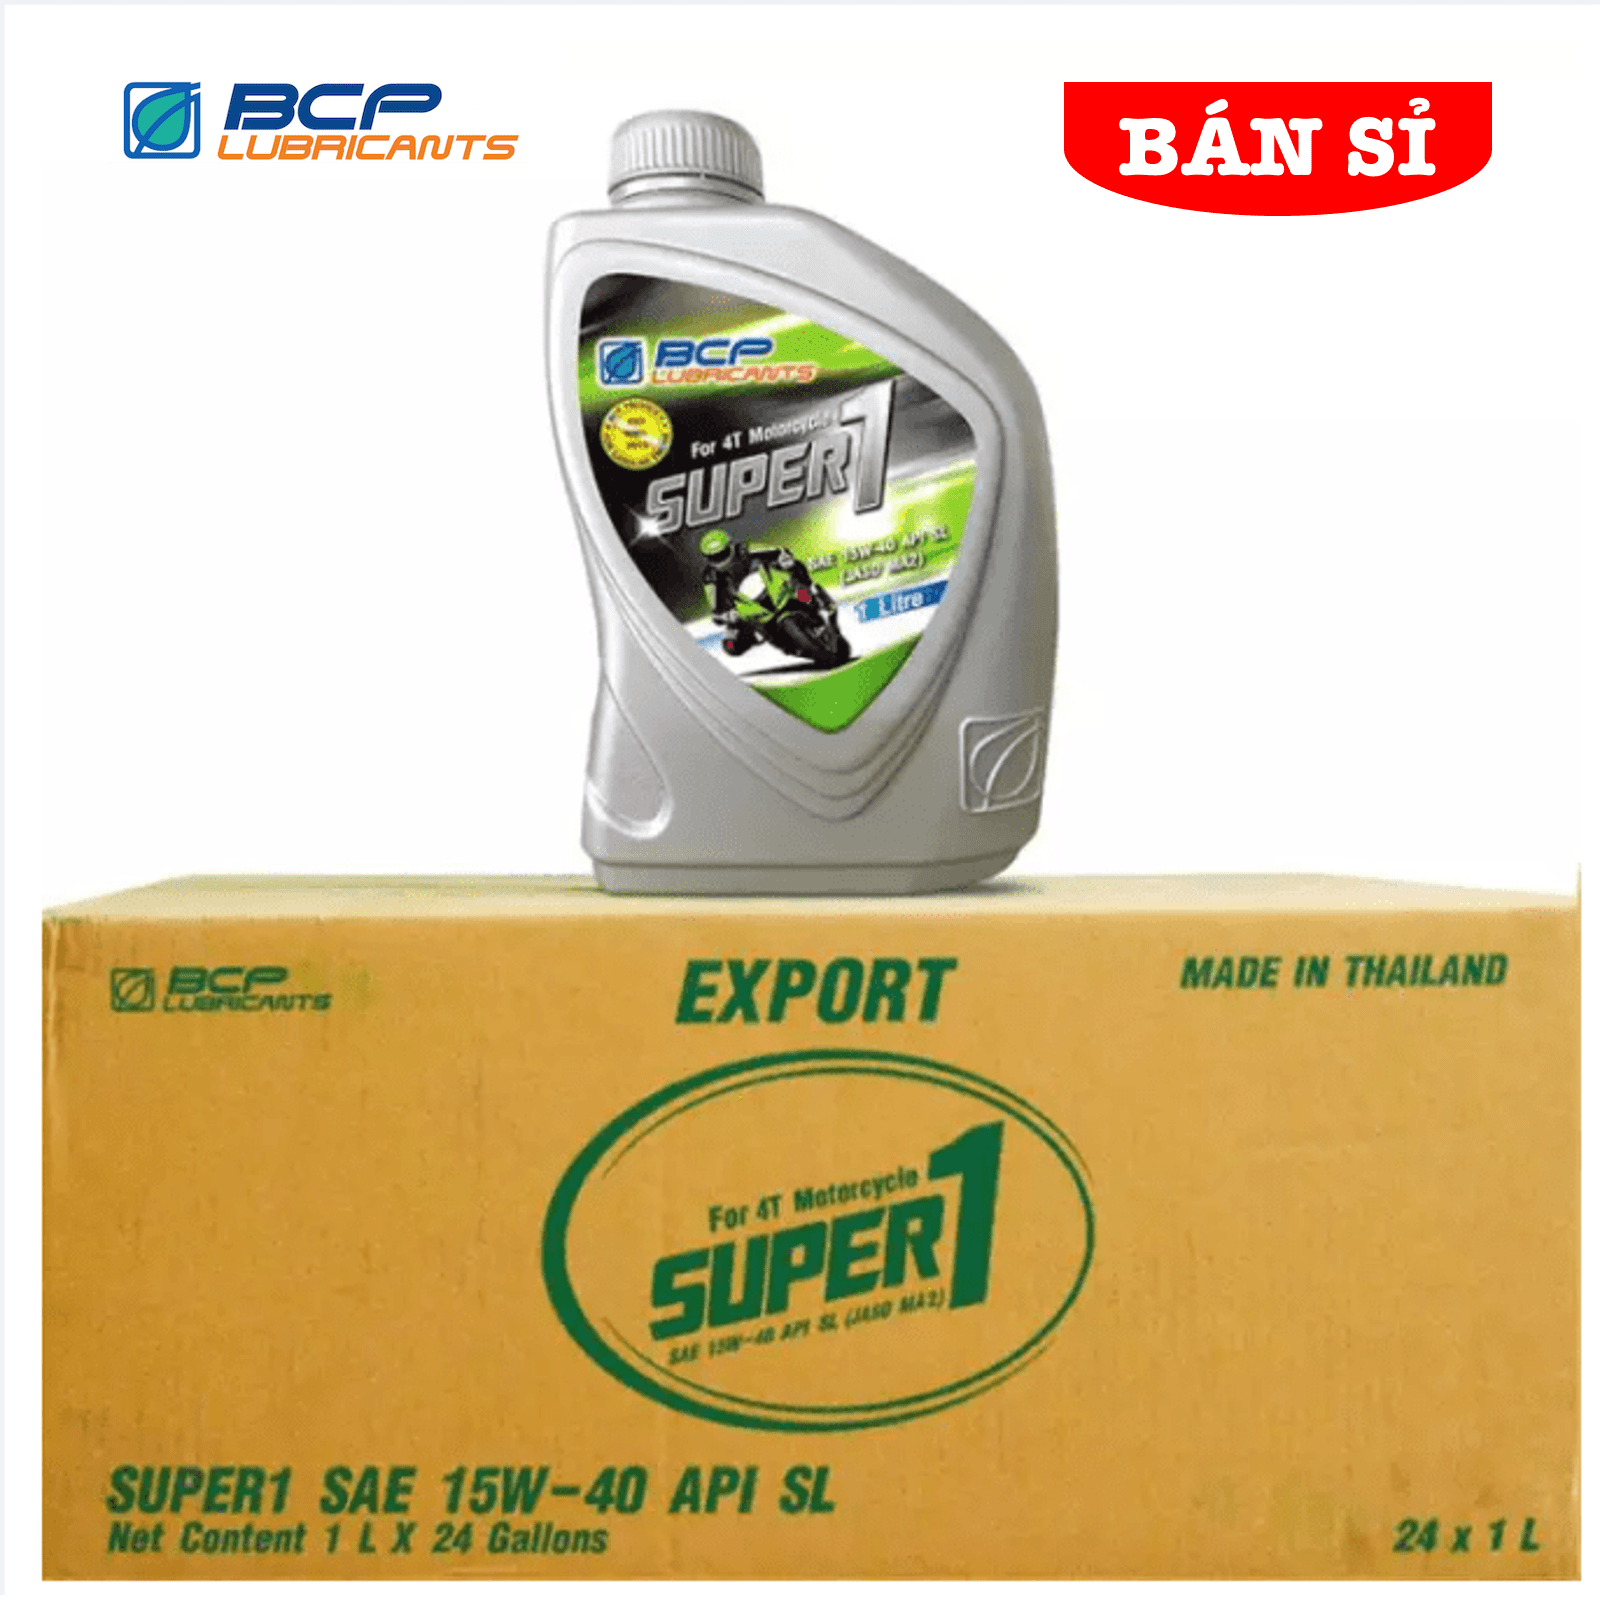 BCP SUPER 1 - 4T MOTORCYCLE 15W-40